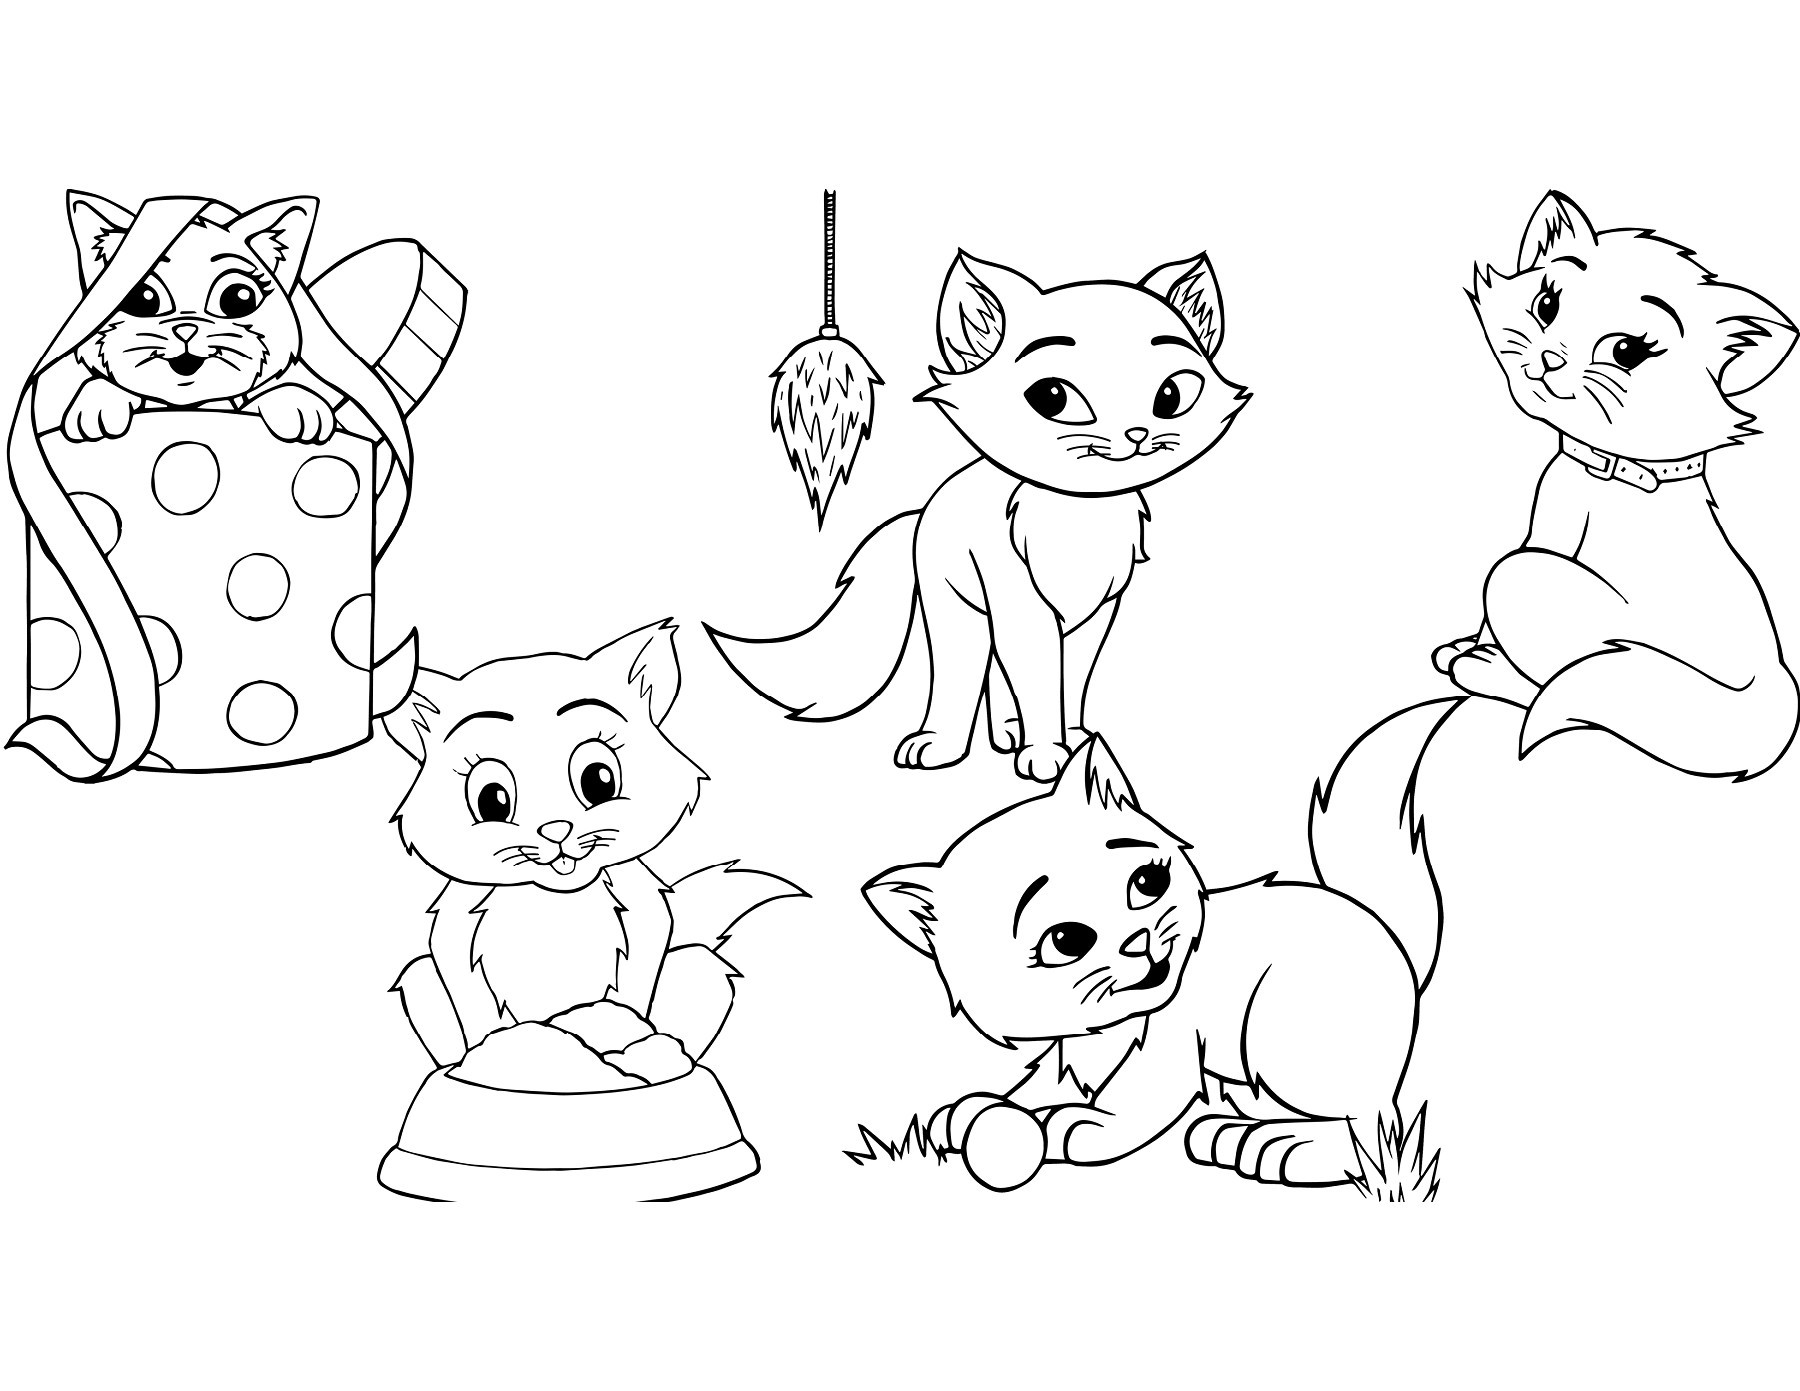 Puppy & Kitten PLR Coloring Pages Pages 1-9 - Flip PDF Download | FlipHTML5